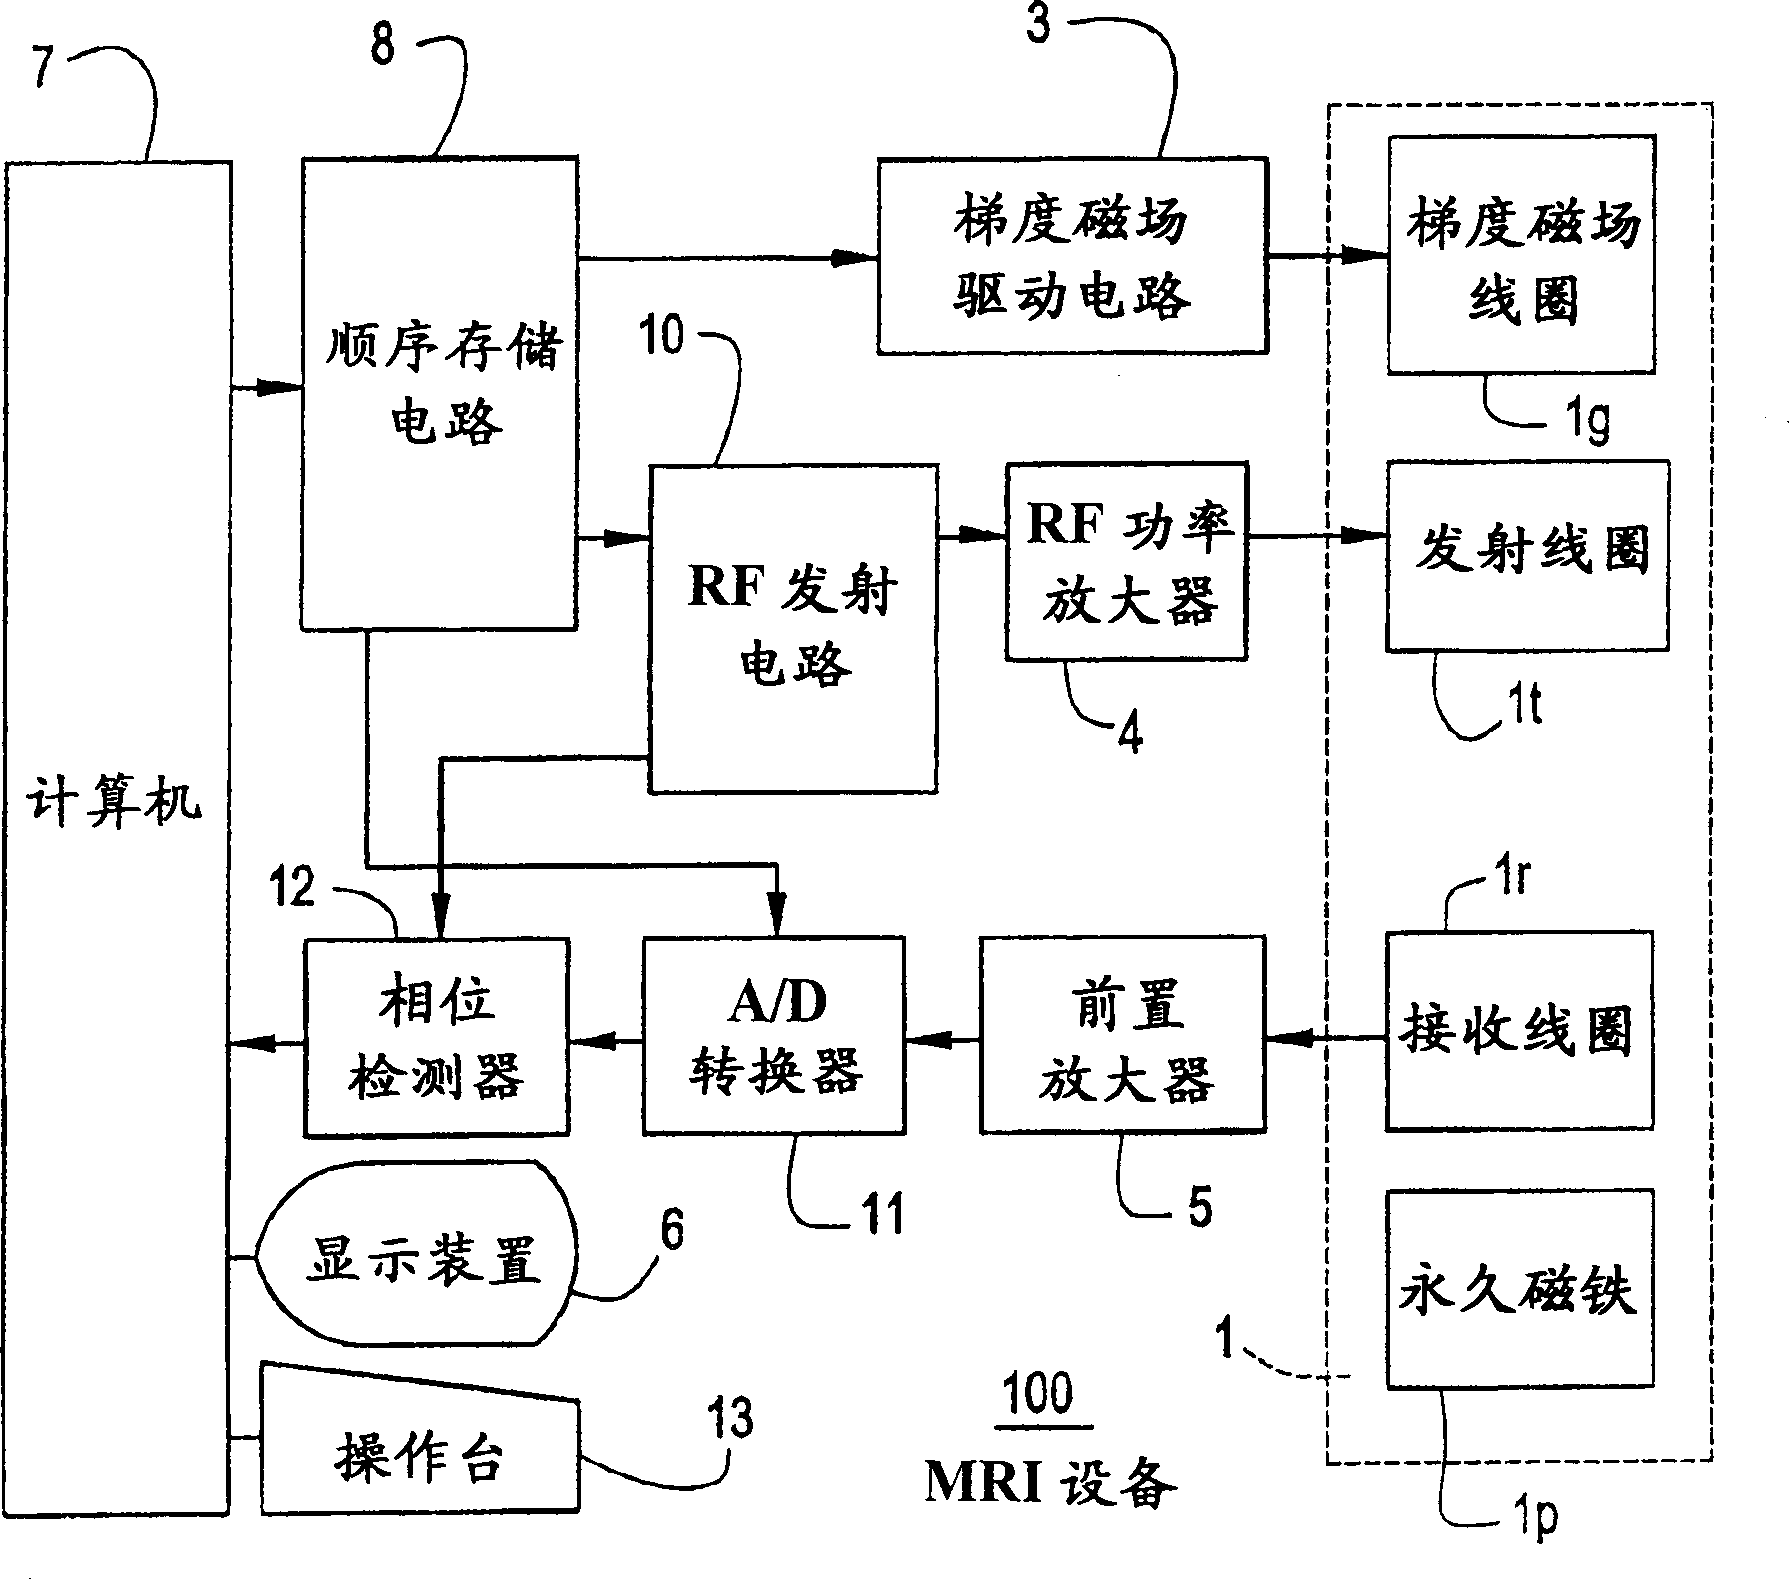 Radio-frequency transmitting circuit, complex digital synthesizer and magnetic resonance imaging equipment